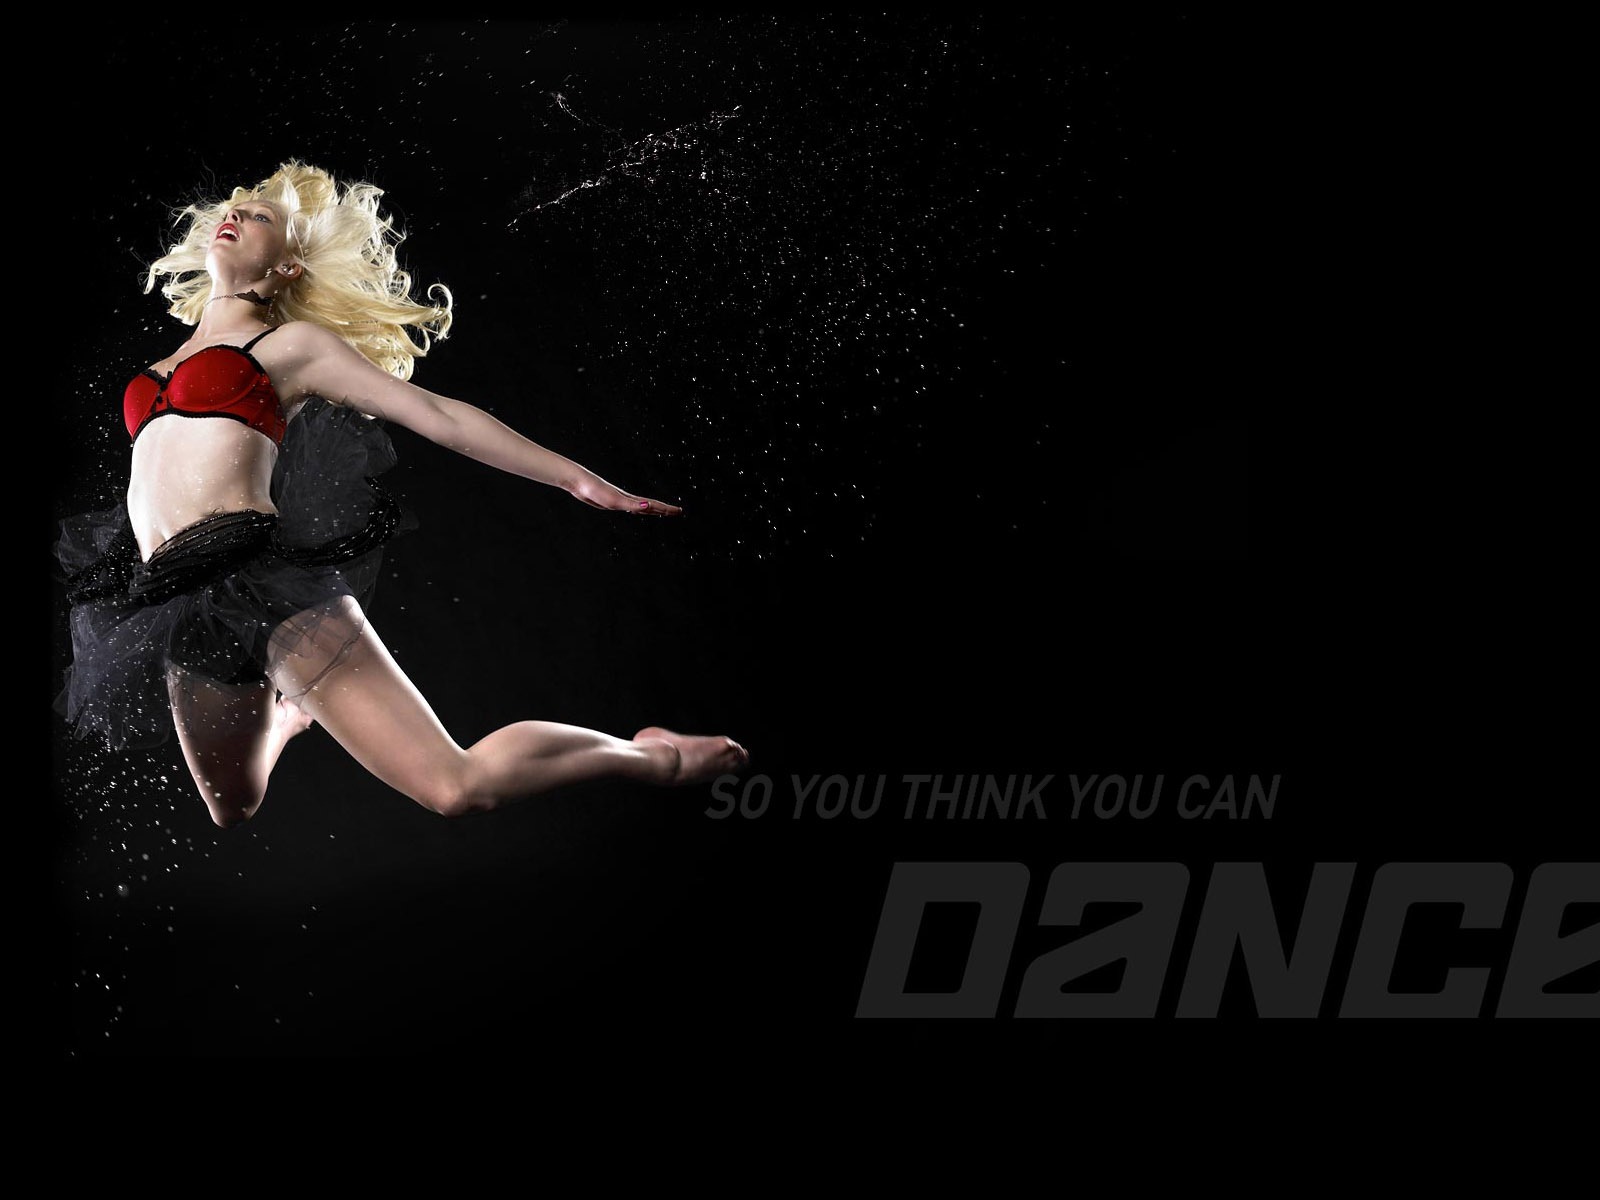 So You Think You Can Dance wallpaper (1) #13 - 1600x1200